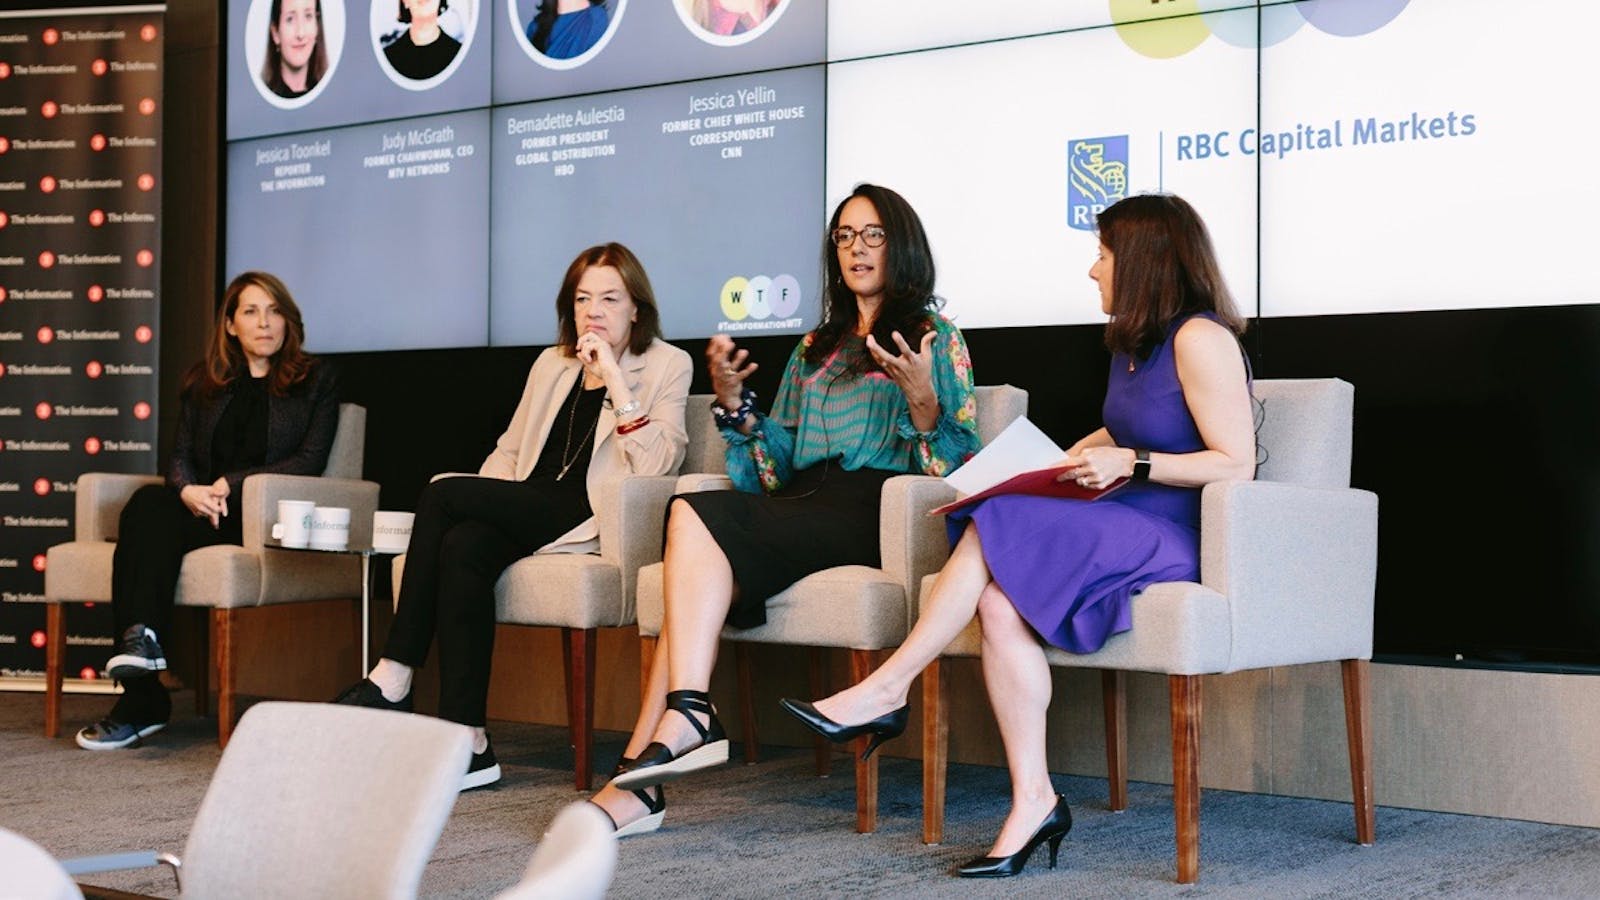 Jessica Yellin, Judy McGrath, Bernadette Aulestia and The Information's Jessica Toonkel at the Women in Tech, Media and Finance conference on Tuesday. Photo by Karen Obrist